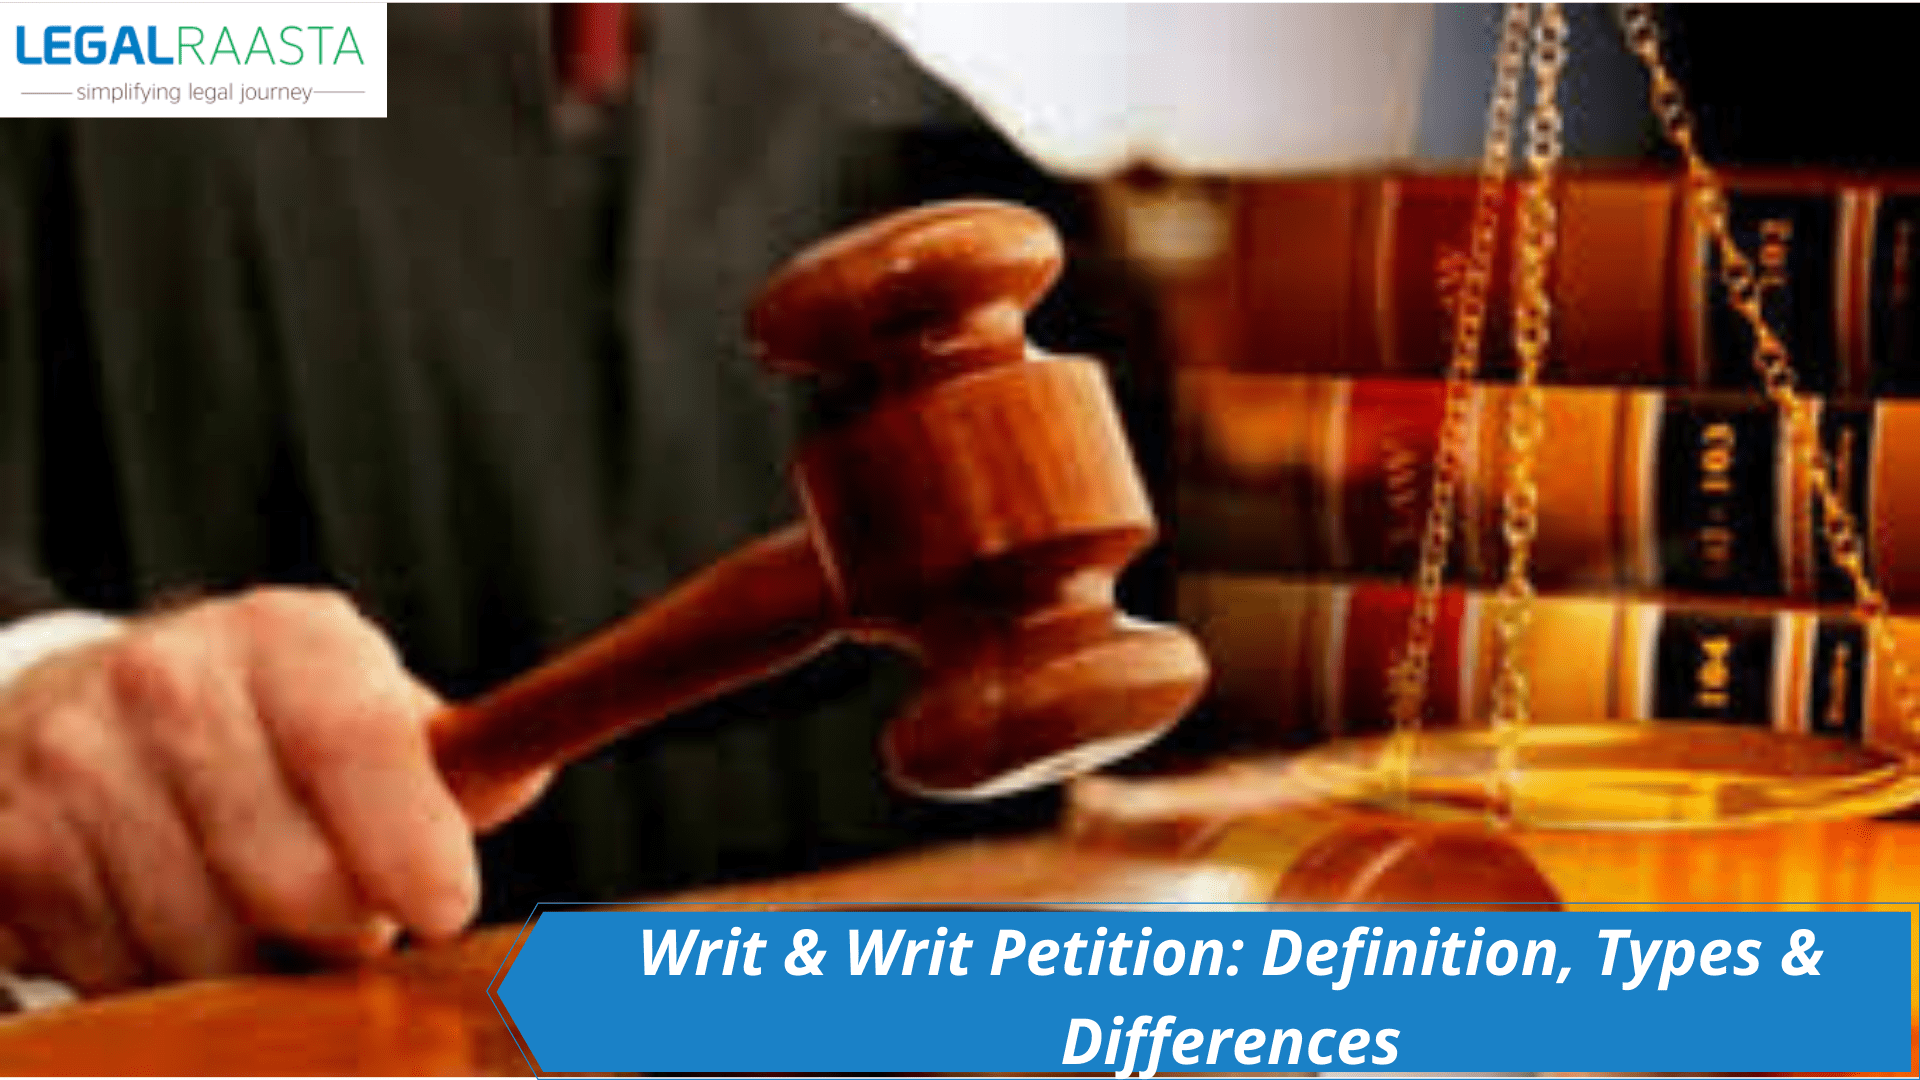 writ-writ-petition-definition-types-differences